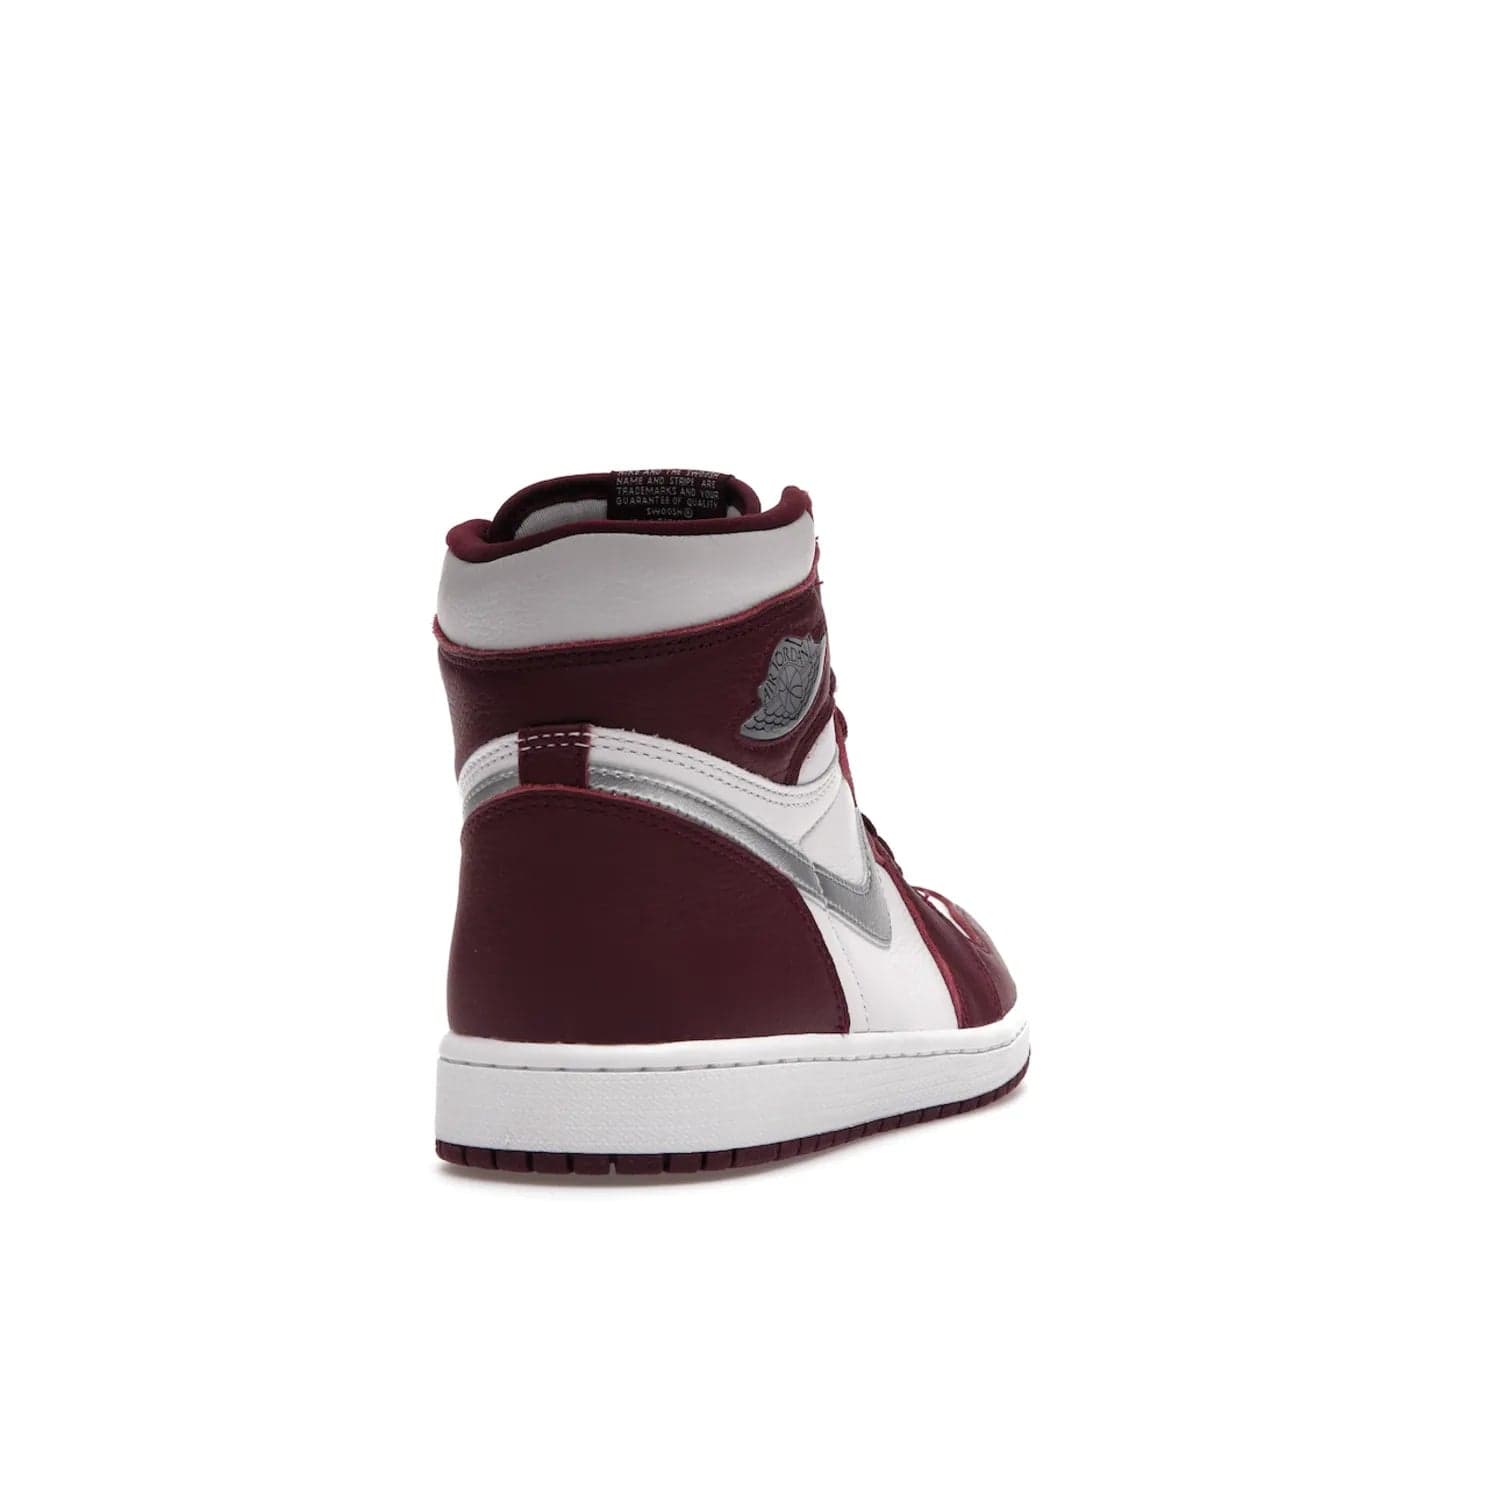 Jordan 1 Retro High OG Bordeaux - Image 30 - Only at www.BallersClubKickz.com - Shop the classic Air Jordan 1 High Bordeaux with a modern high-top cut. The timeless Bordeaux and White-Metallic Silver colorway, releasing Nov 20, 2021, is perfect for practice or a night out.